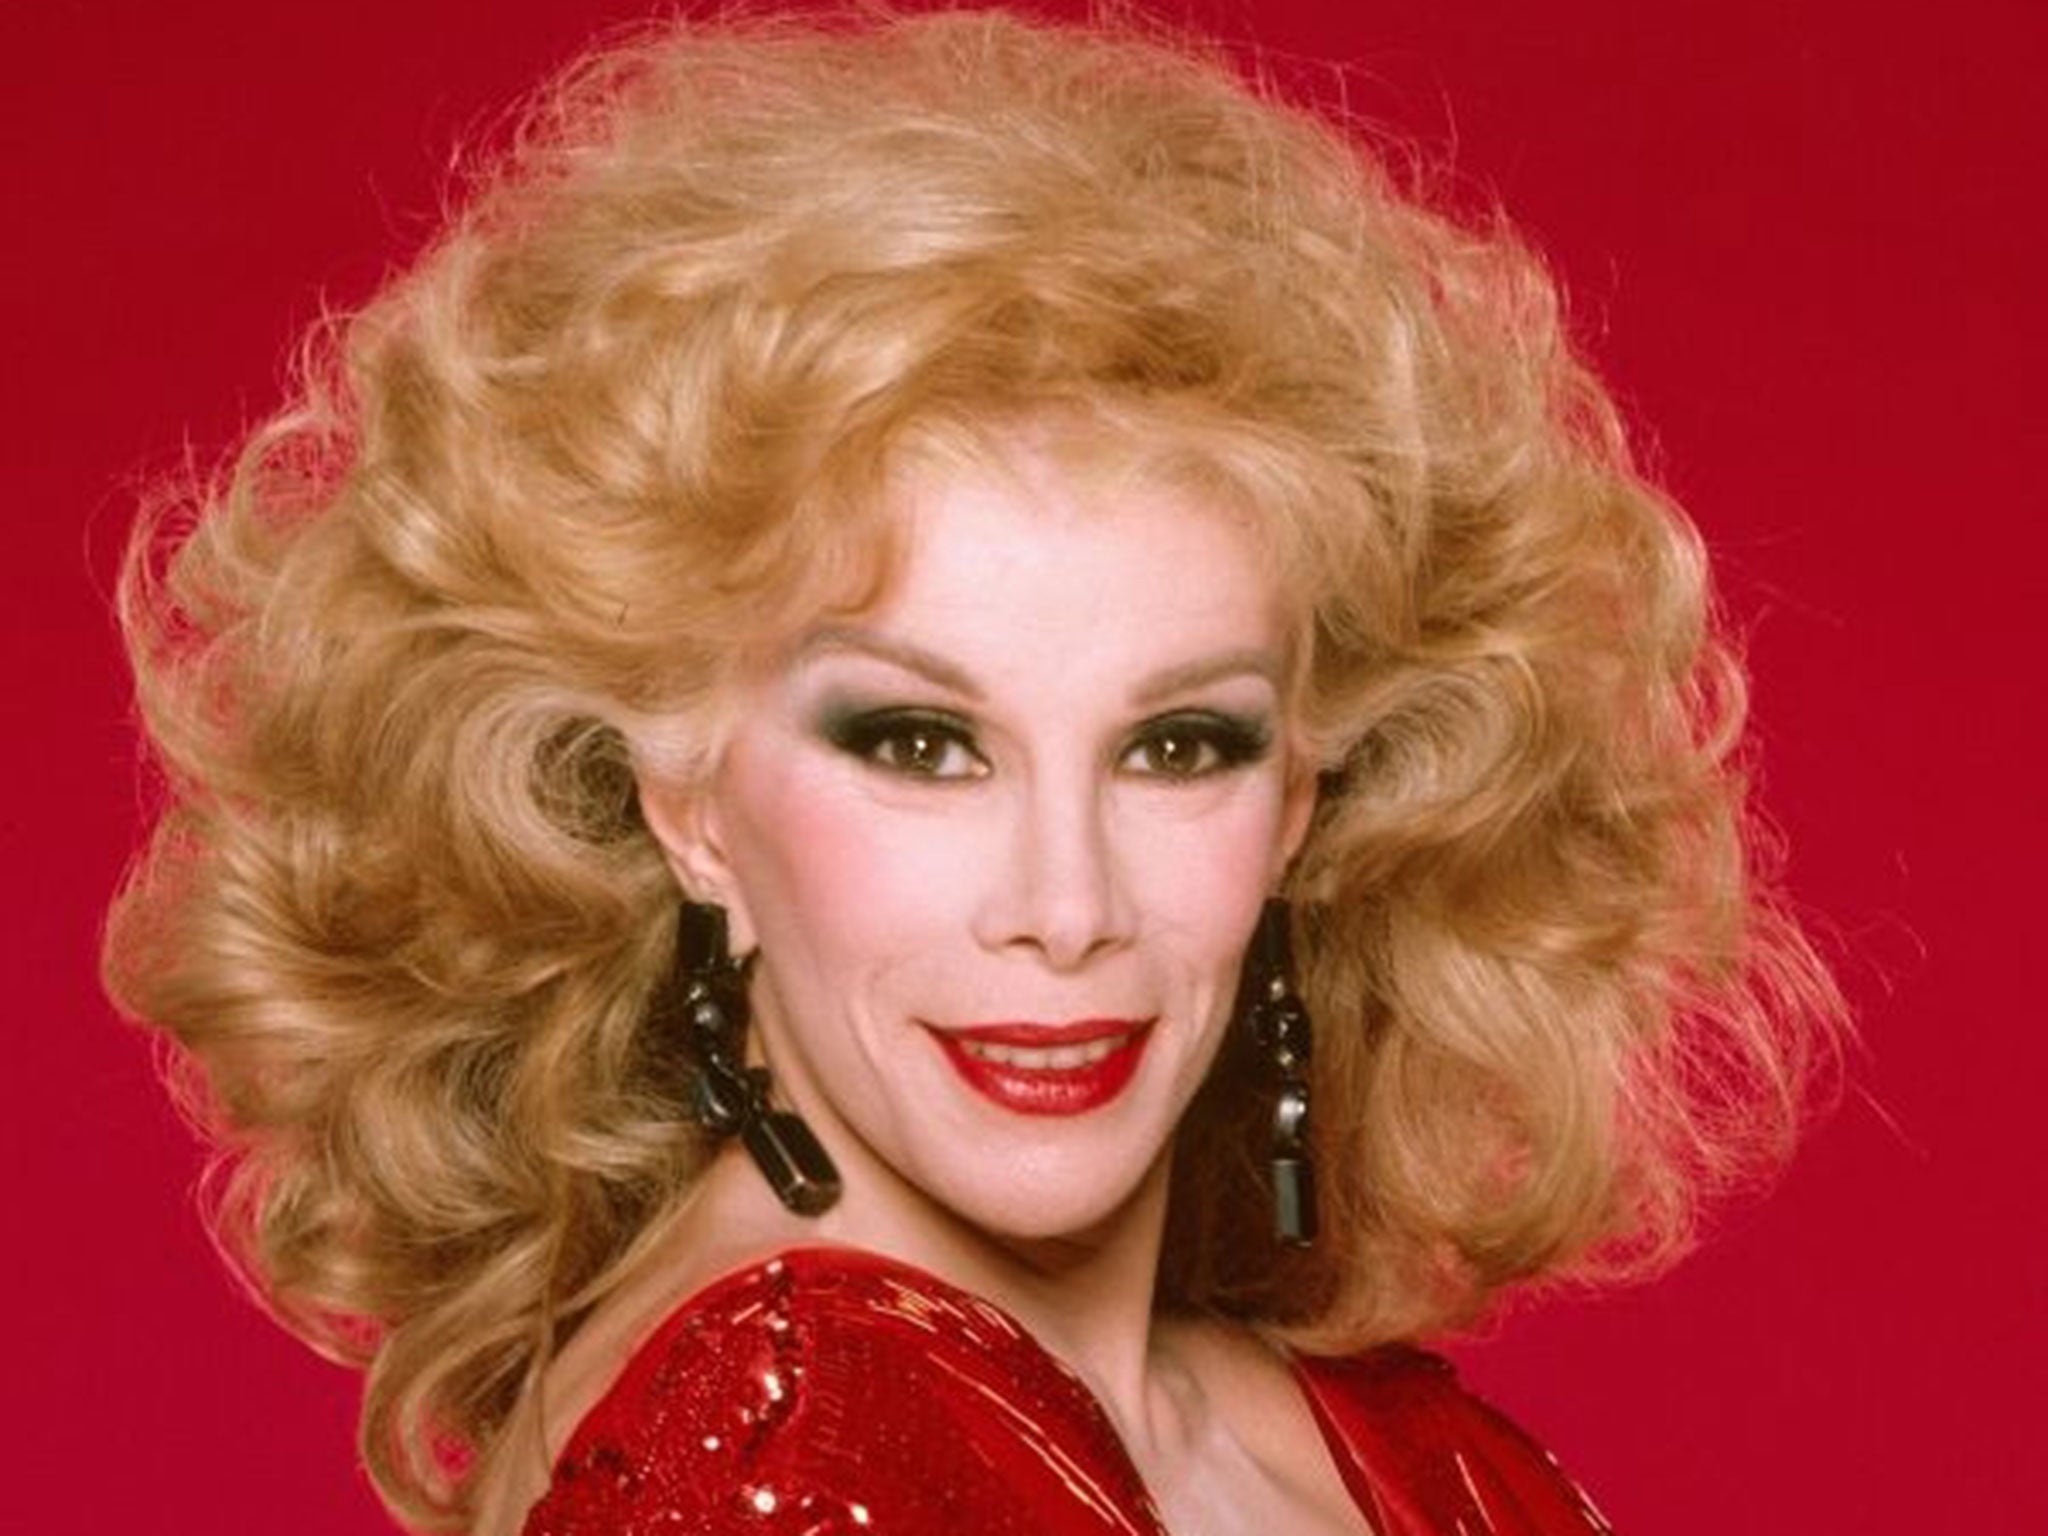 Comedian Joan Rivers poses for a portrait in 1990 in Los Angeles, California.